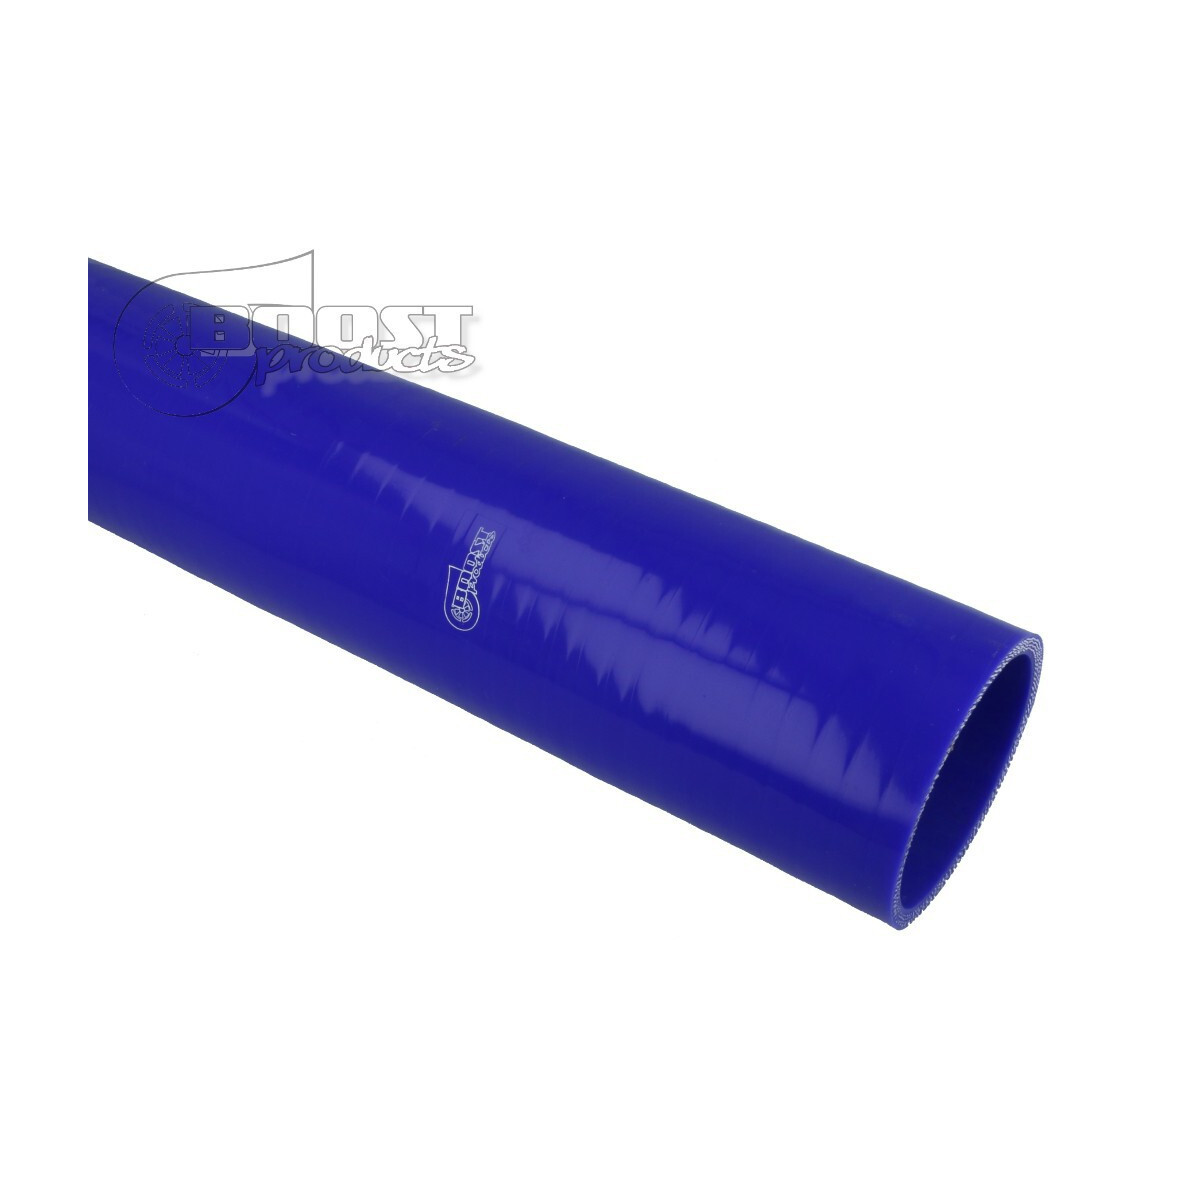 BOOST products Silicone Hose 127mm, 1m Length, blue